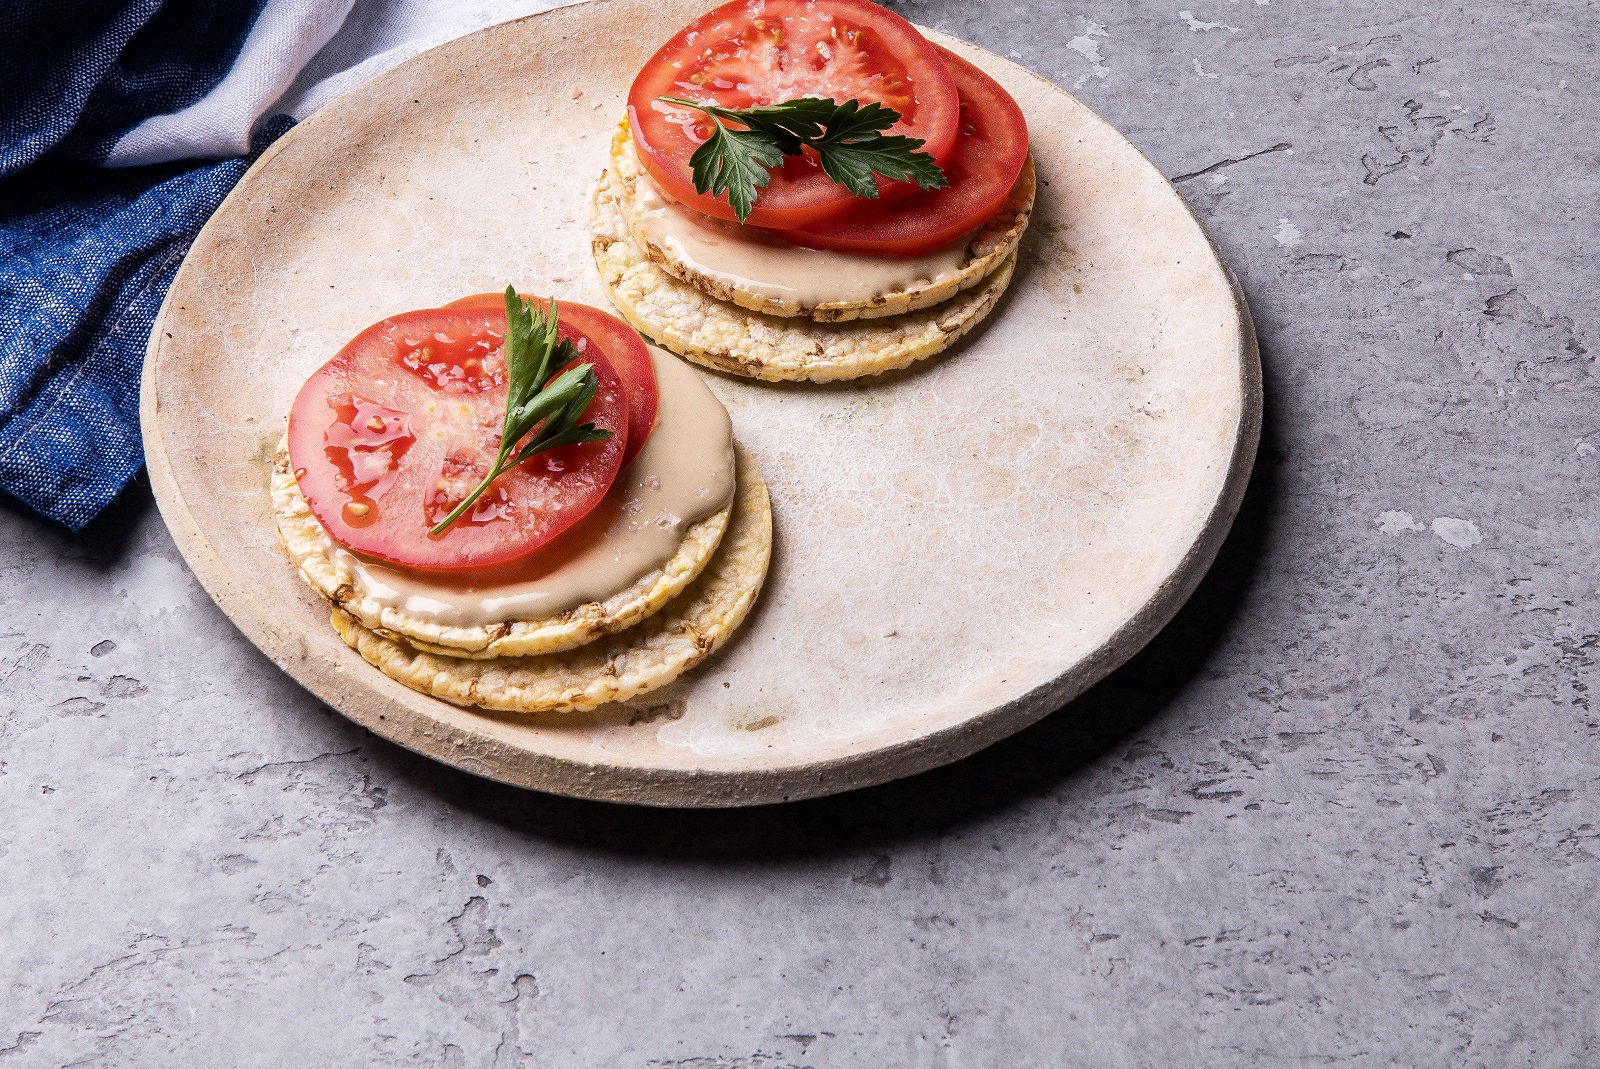 Tomato & Tahini on CORN THINS slices for lunch